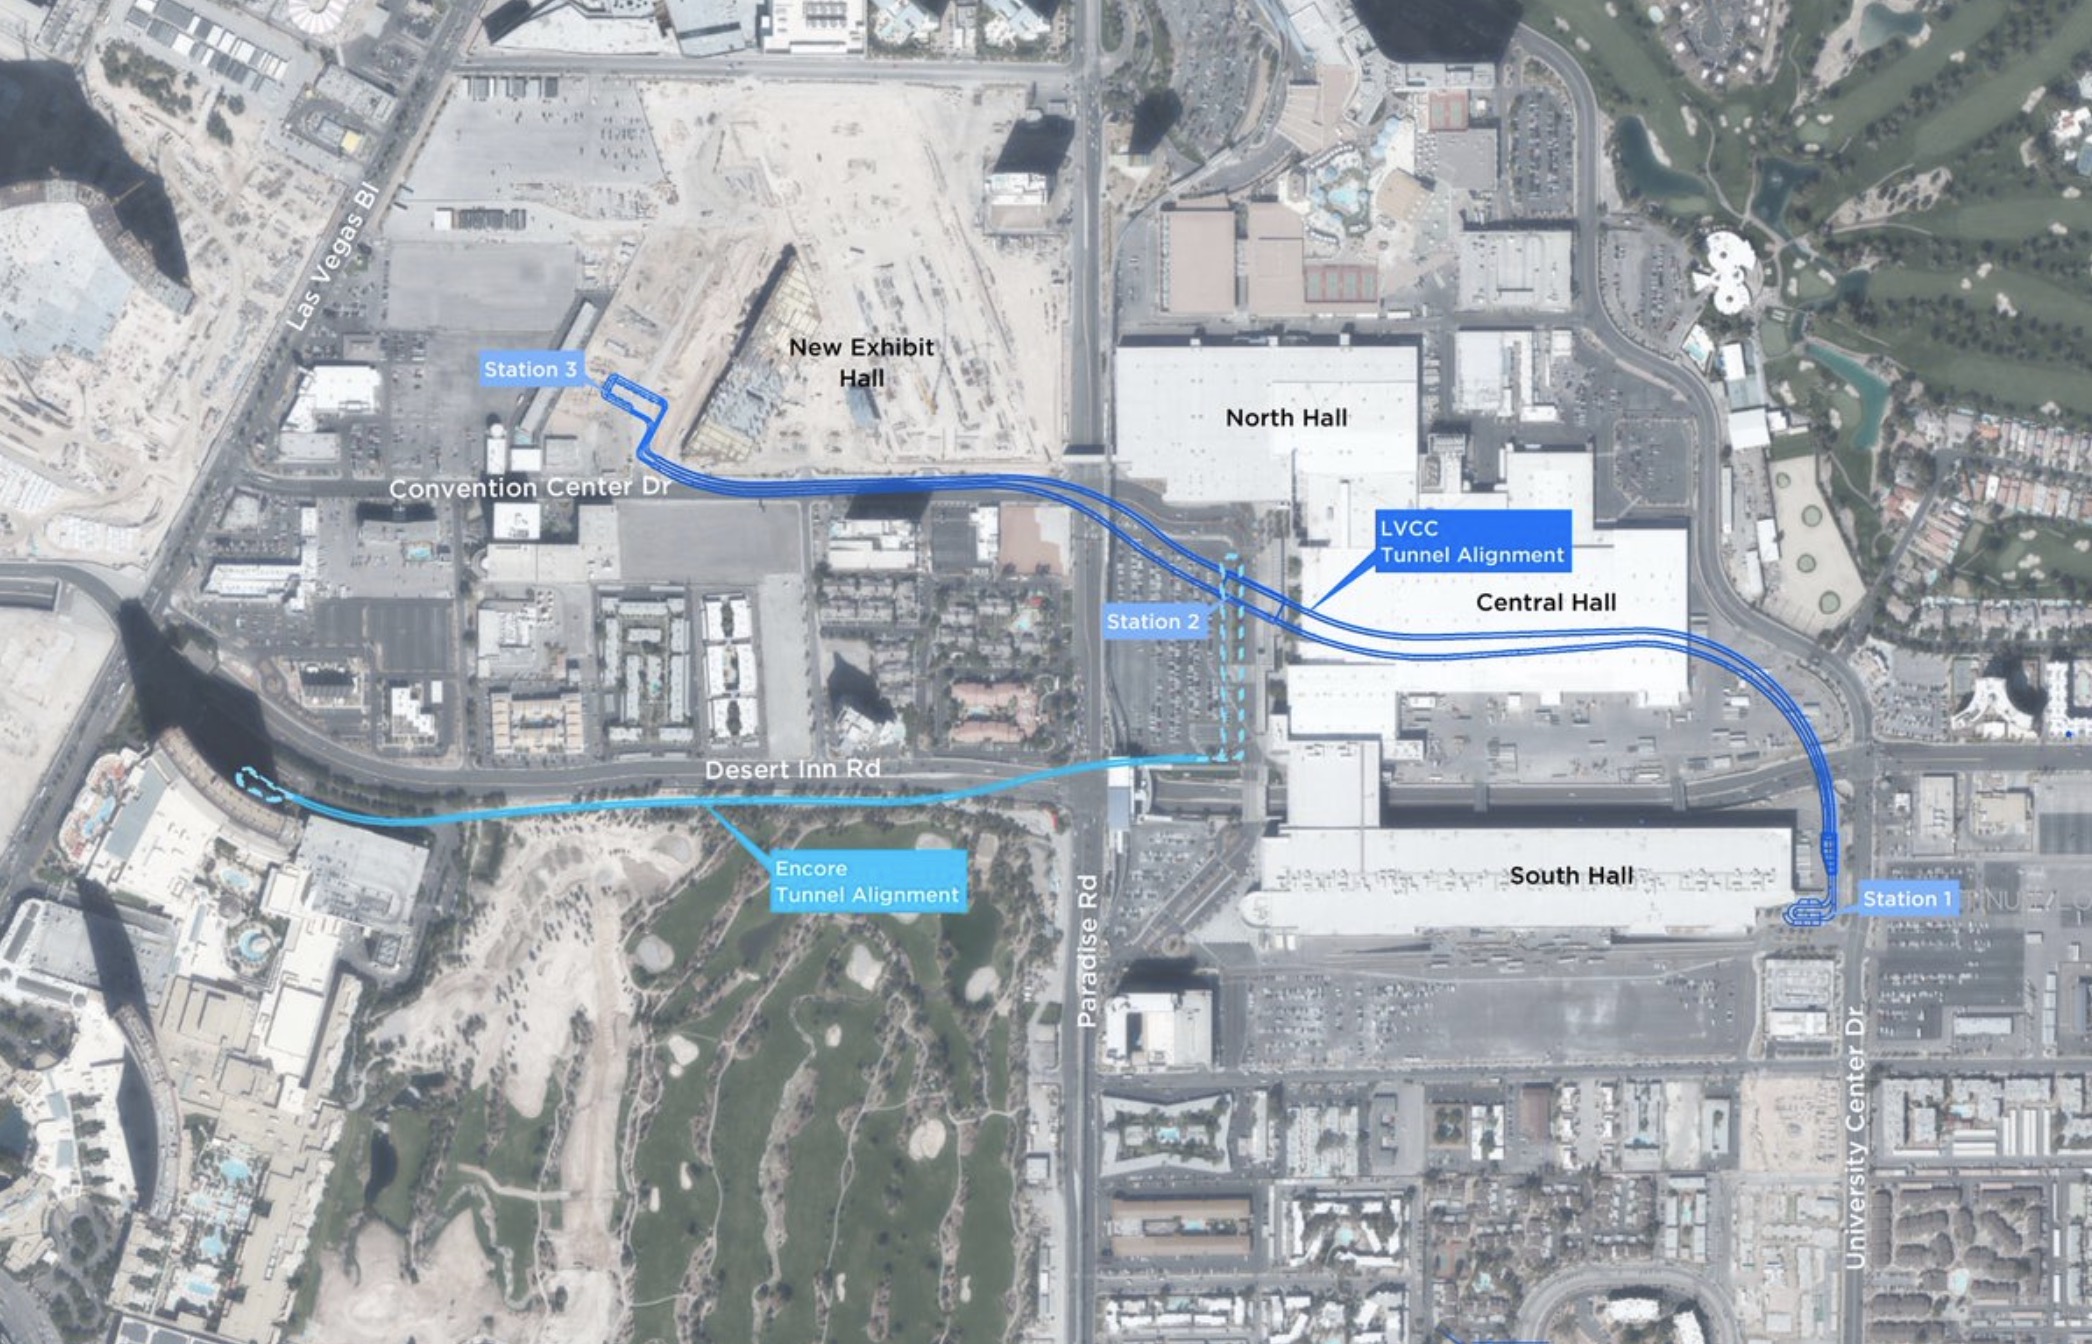 The Boring Company's Las Vegas Loop stations are nearly complete